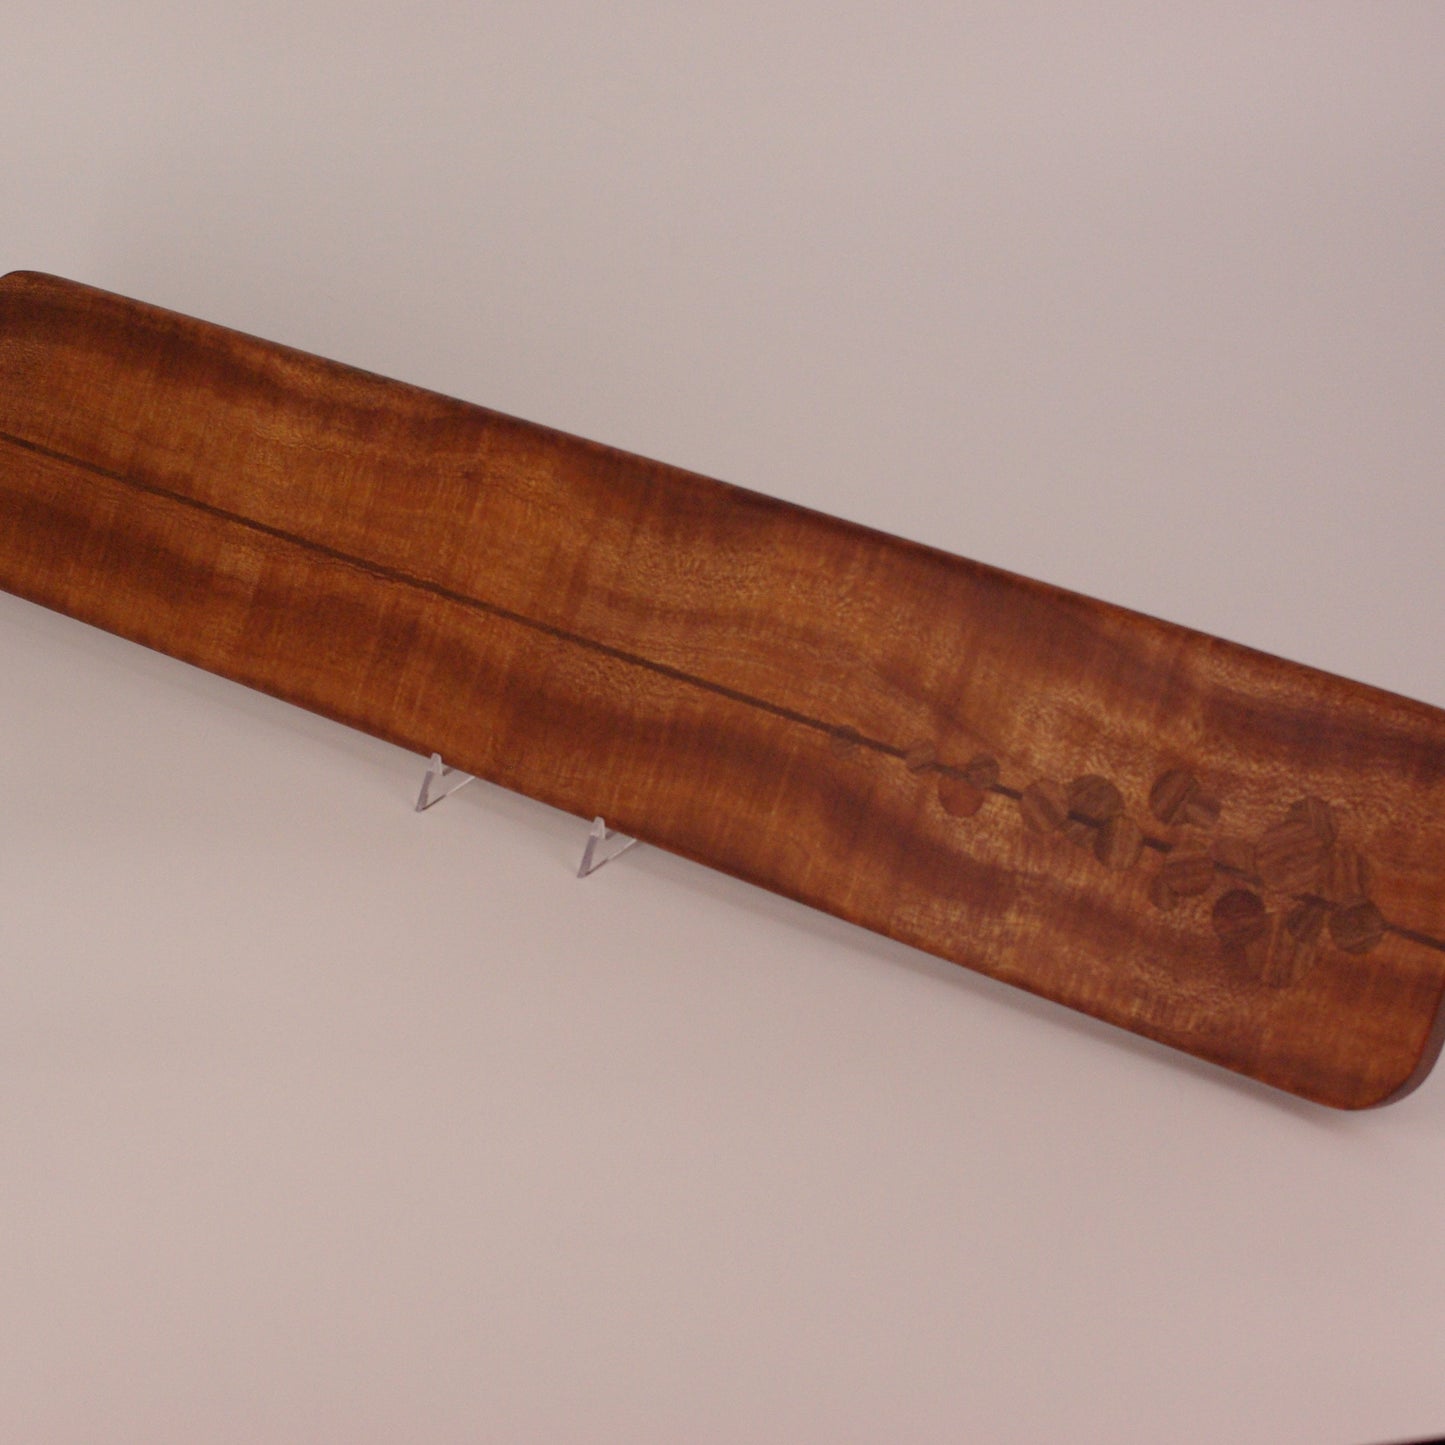 Sapele Board with Contrasting Sapele Dots and Stripe